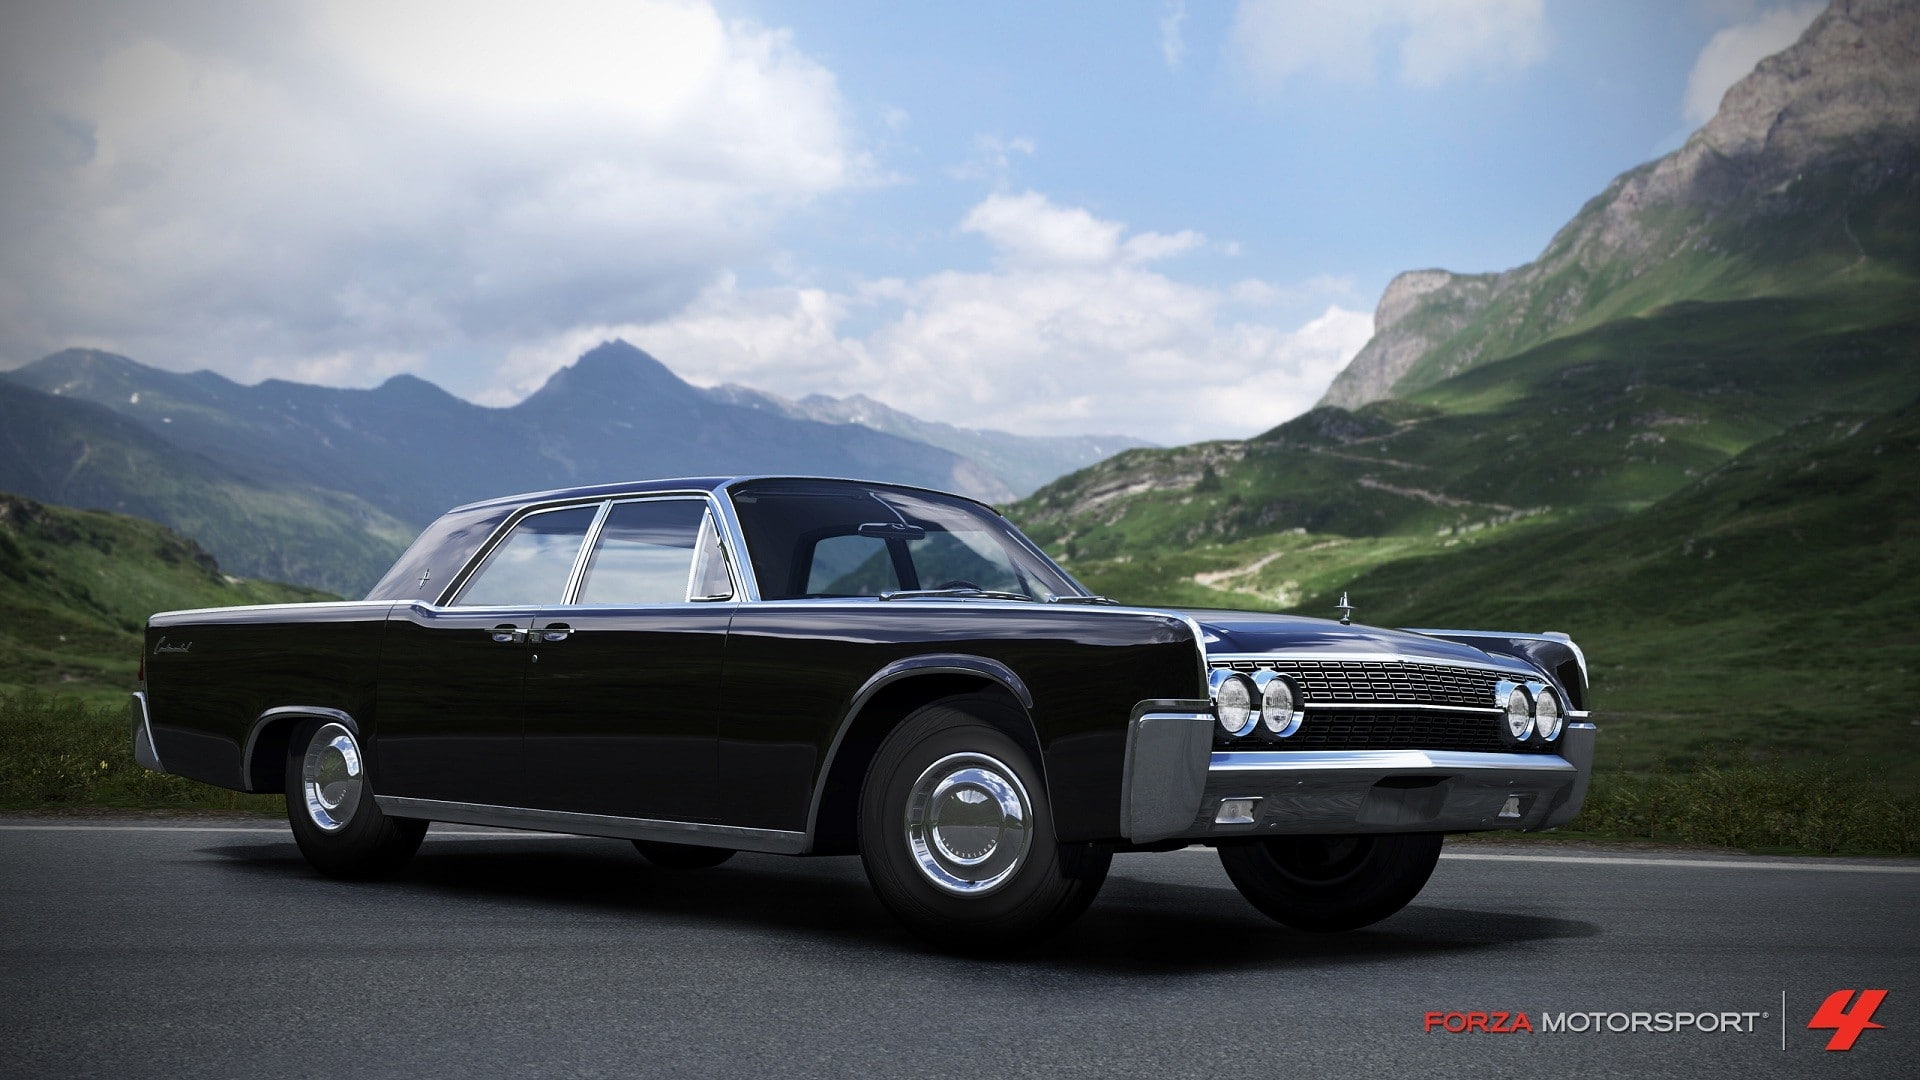 video games cars xbox 360 1962 lincoln continental forza motorsport 4 Video Games XBox HD Art